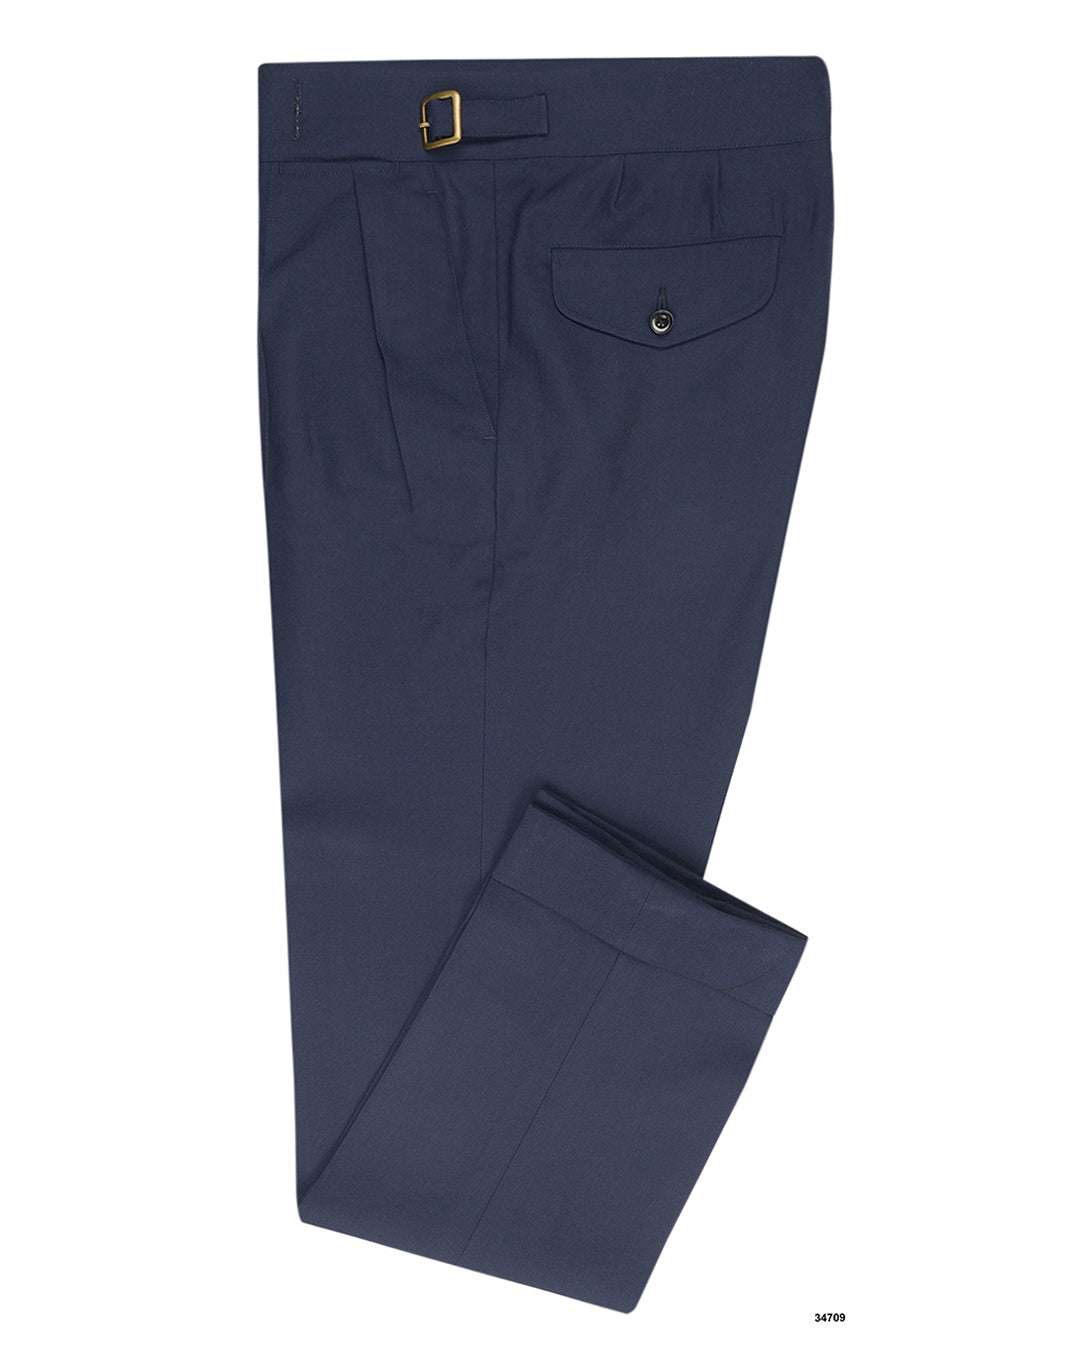 Holland & Sherry Crispaire Navy Solid